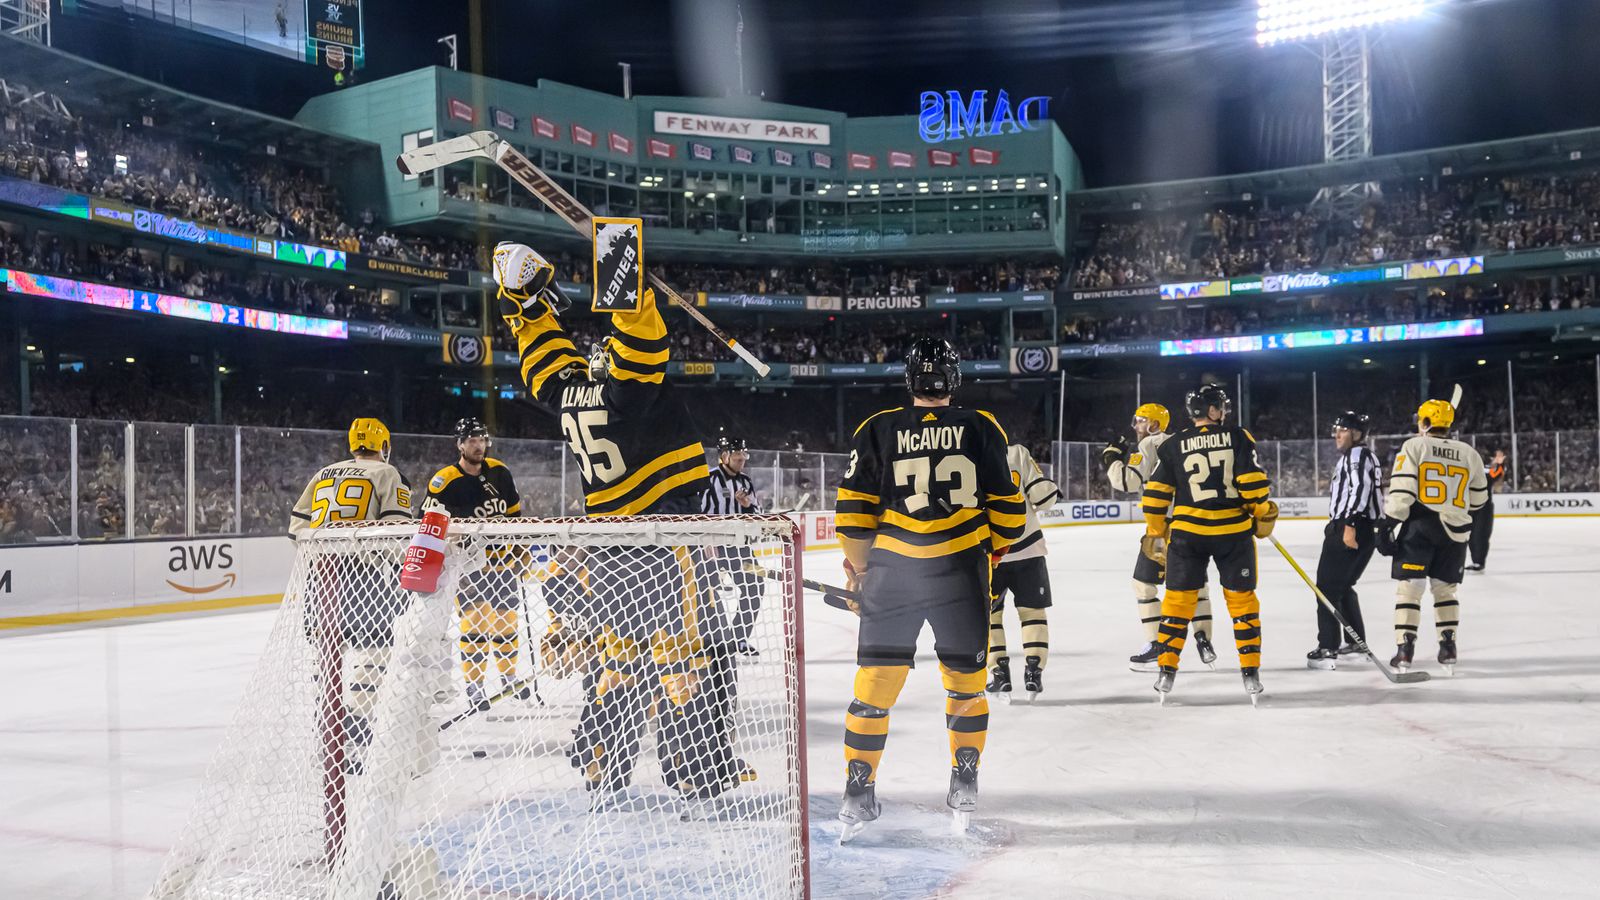 Jake DeBrusk's second goal of the game for the #WinterClassic VICTORY